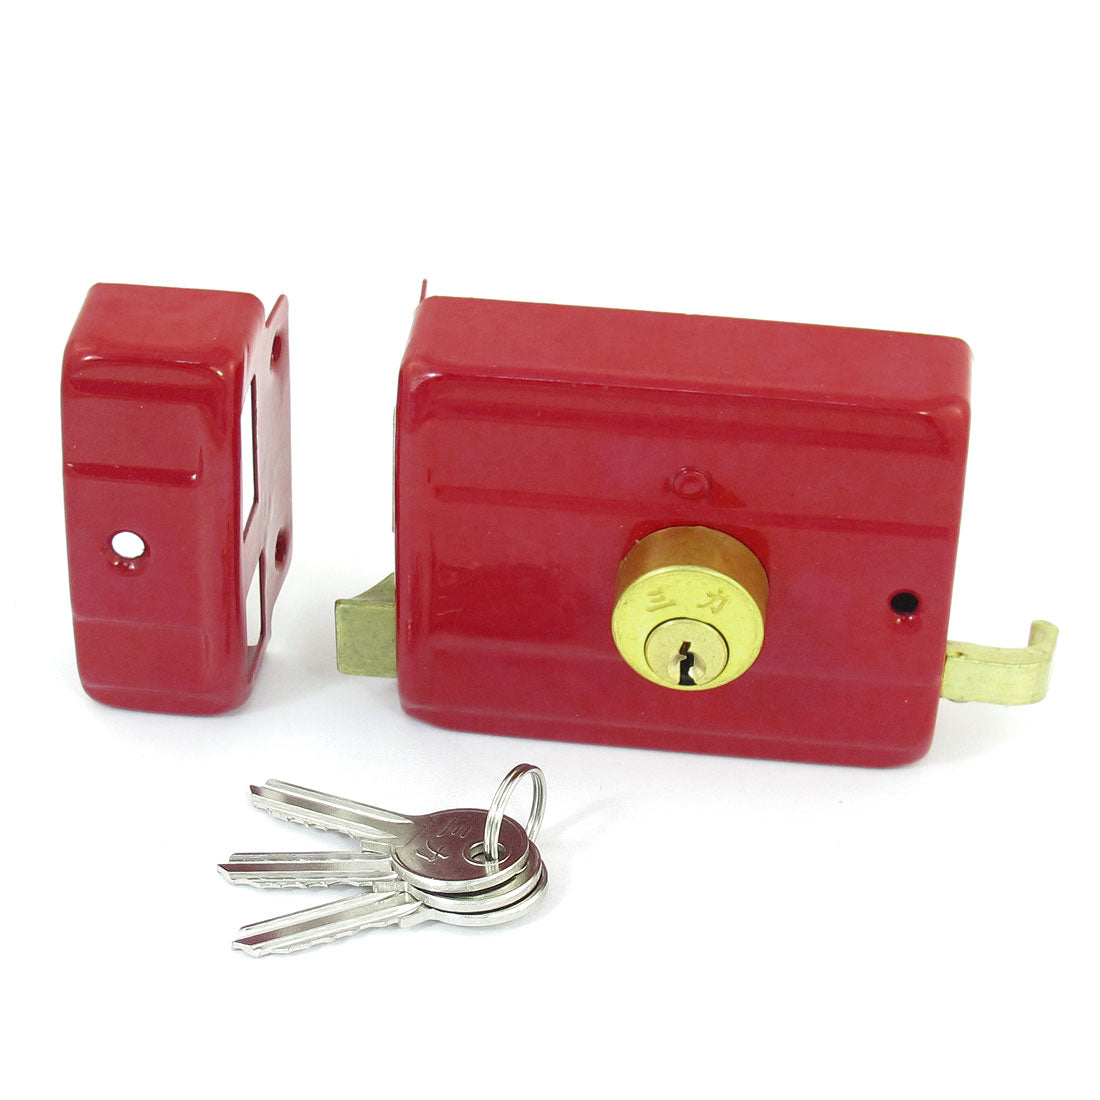 uxcell Uxcell Home Red Metal House Safety Gate Door Double Latchbolt Lock Keys Set